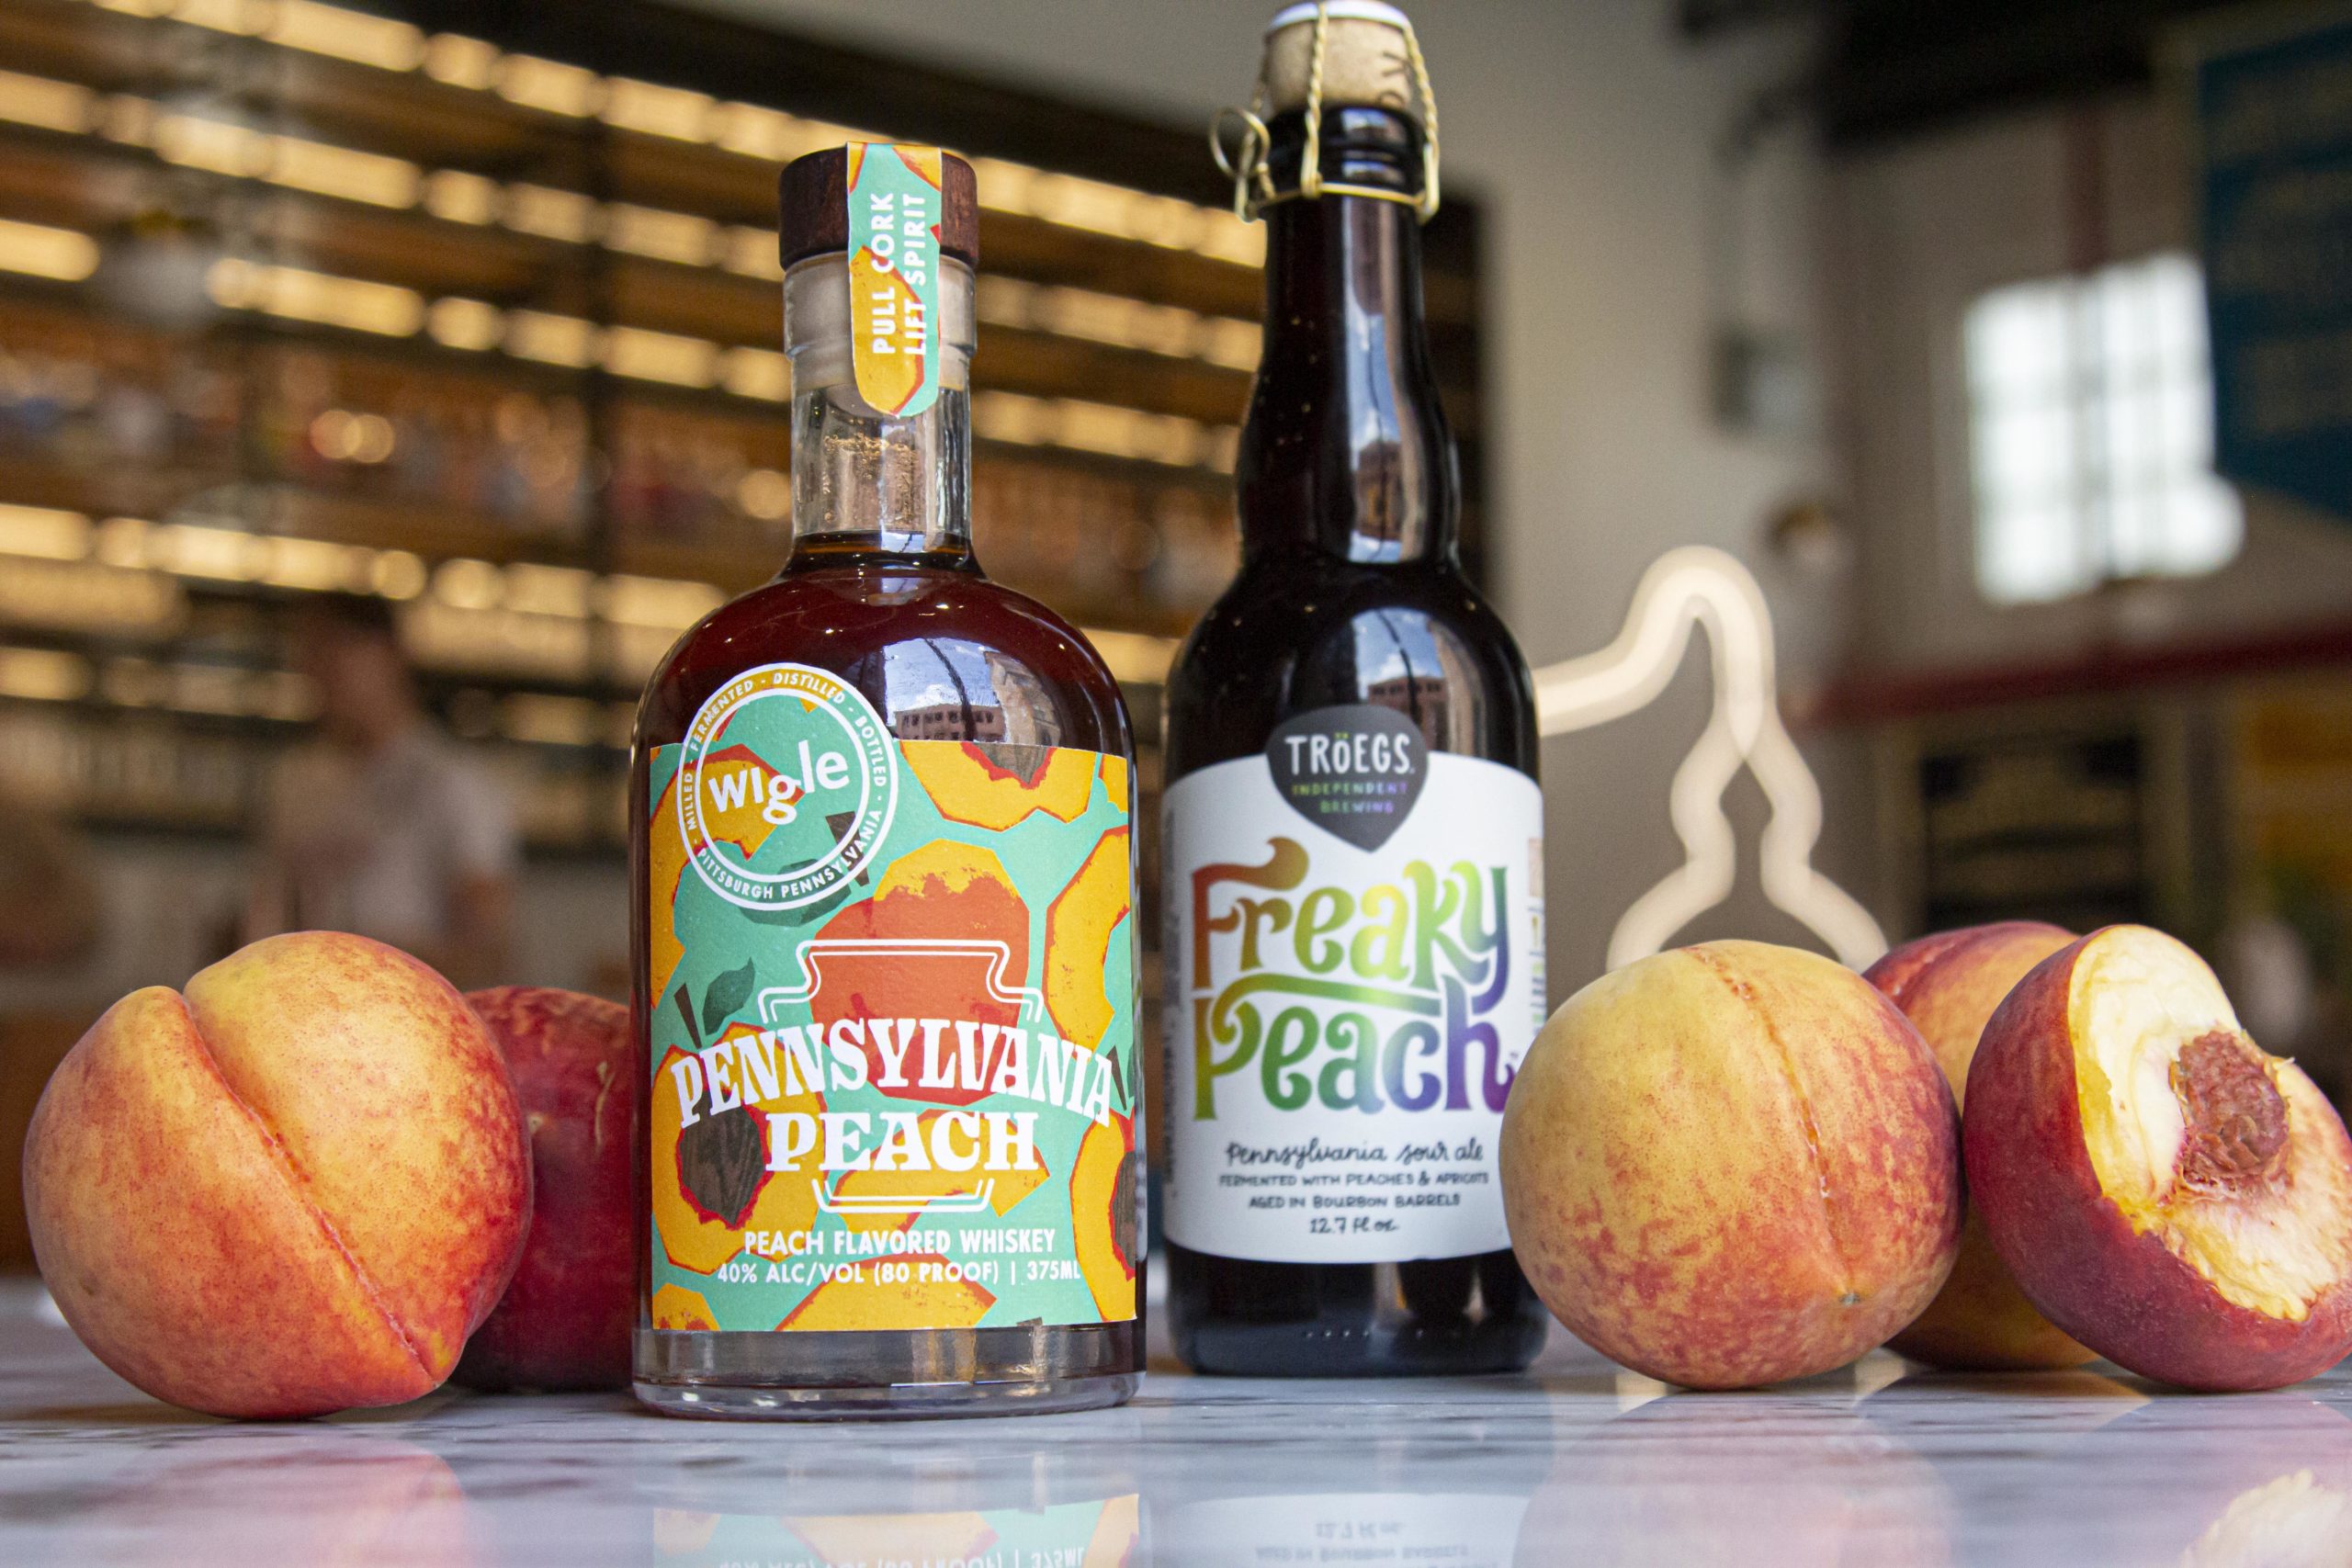 Pennsylvania Peach, our collaboration with Wigle Whiskey, is back